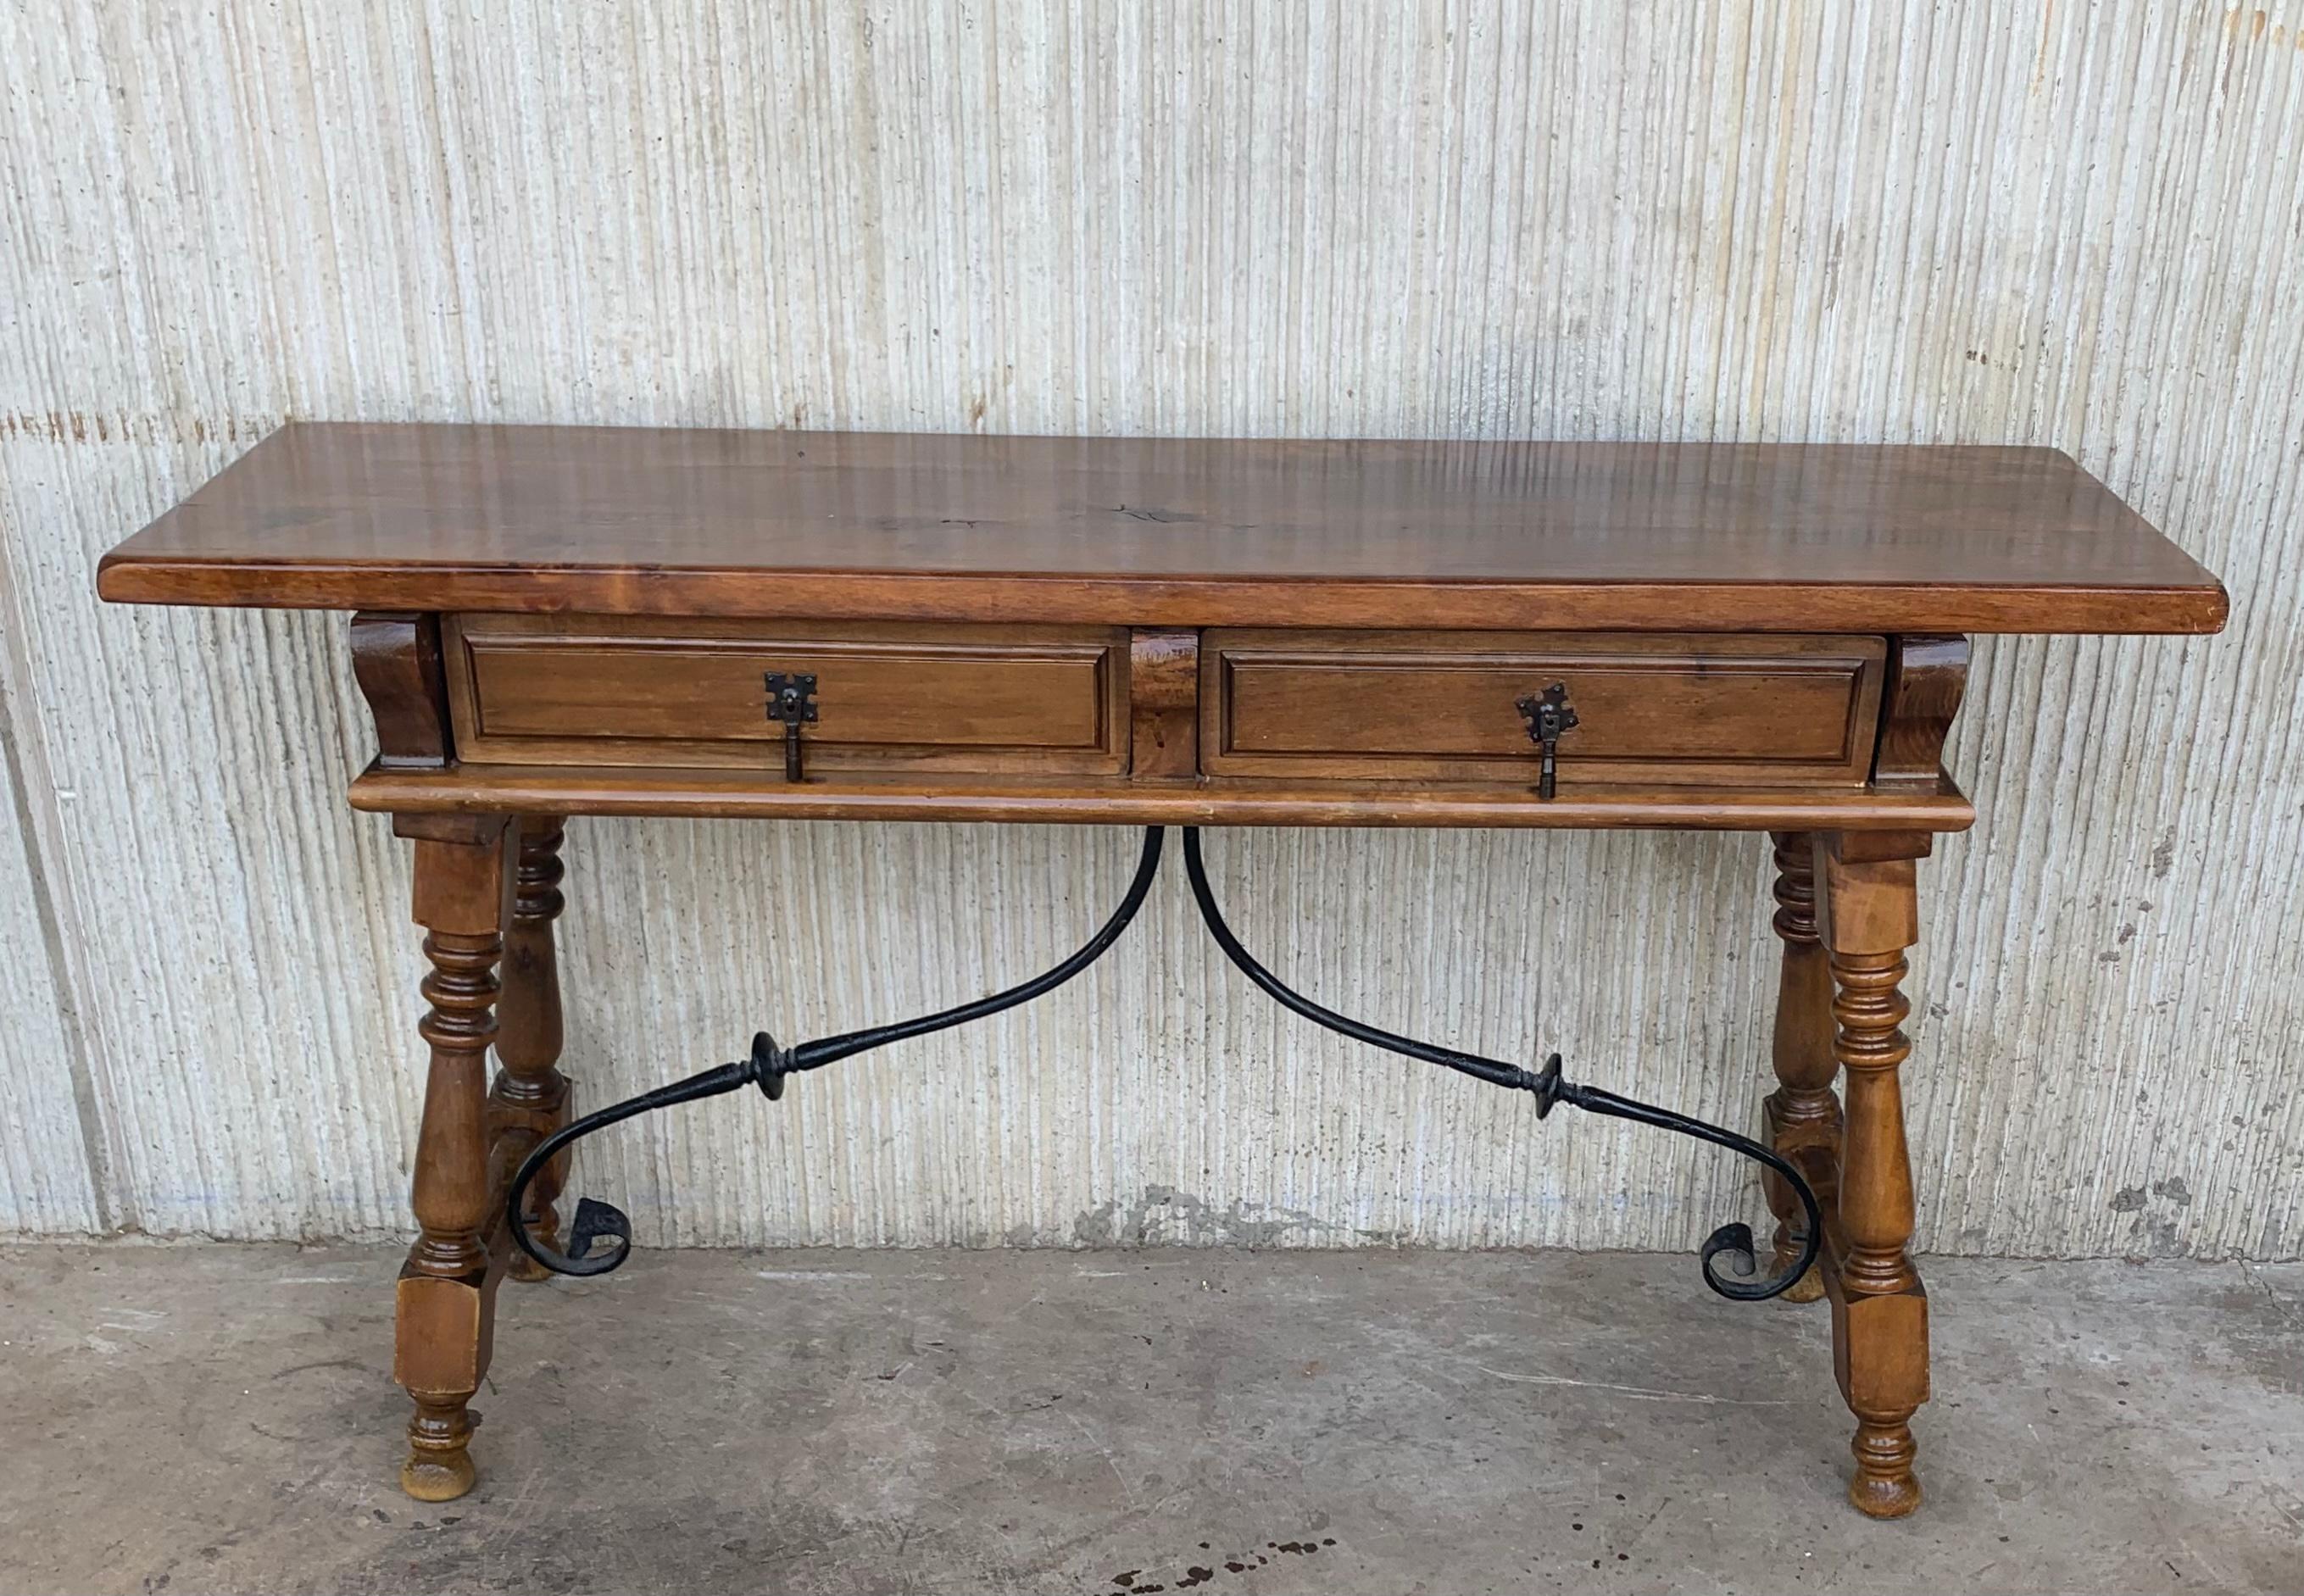 An 19th century Spanish baroque desk, or writing table made of solid walnut with lyre shaped legs joined by wrought iron stretchers. Hand carved decoration across the front and the back. Two drawers with original iron drawer pulls. The top is made